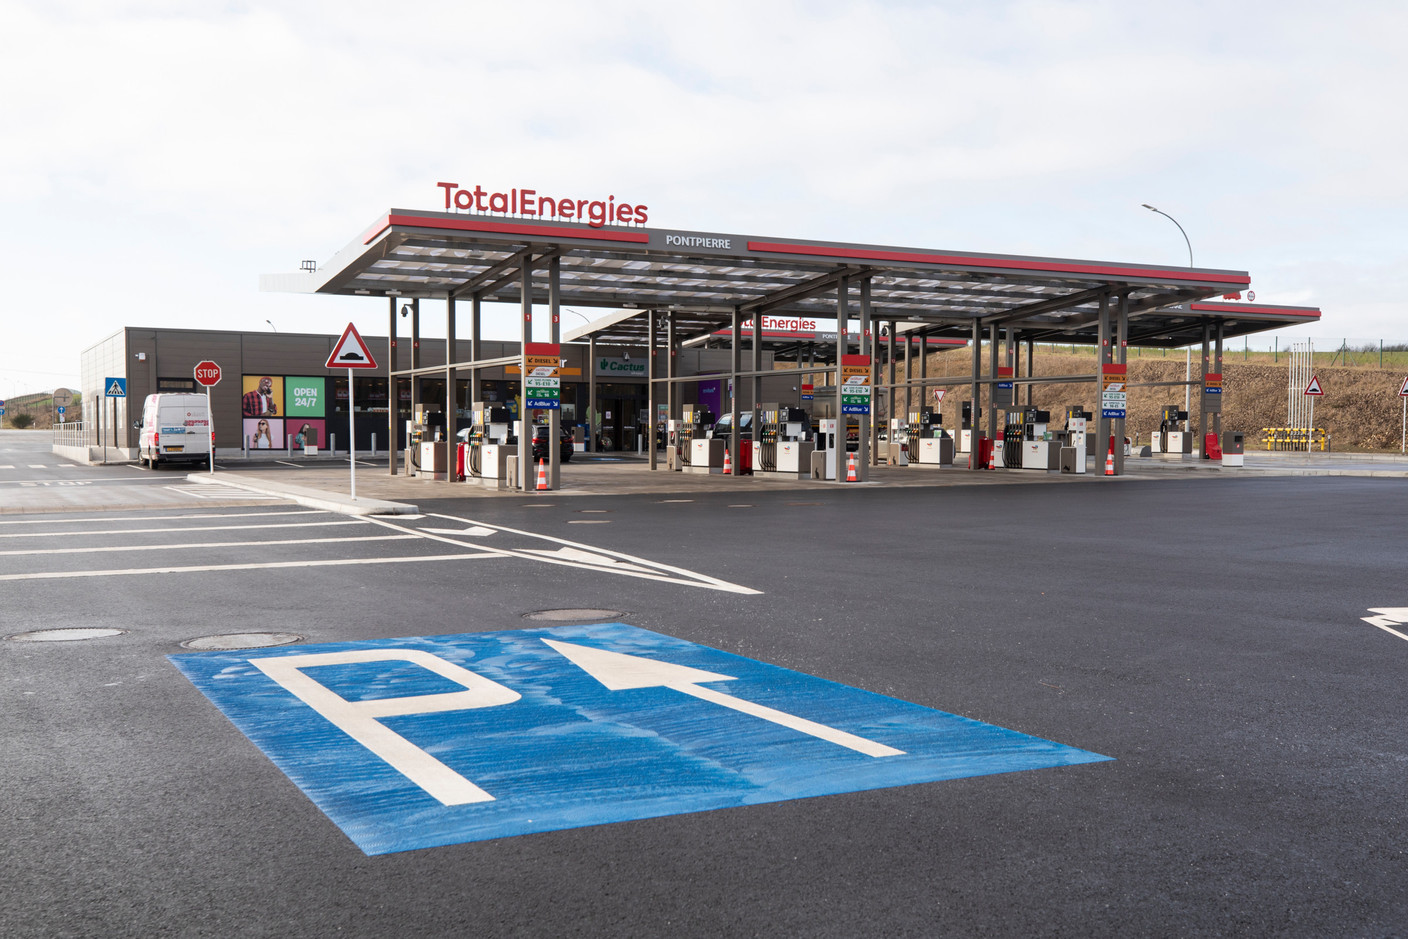 Located on the A4 at Pontpierre, the new TotalEnergies filling station has two pumps for trucks and six pumps for cars. (Photo: Guy Wolff/Maison Moderne)